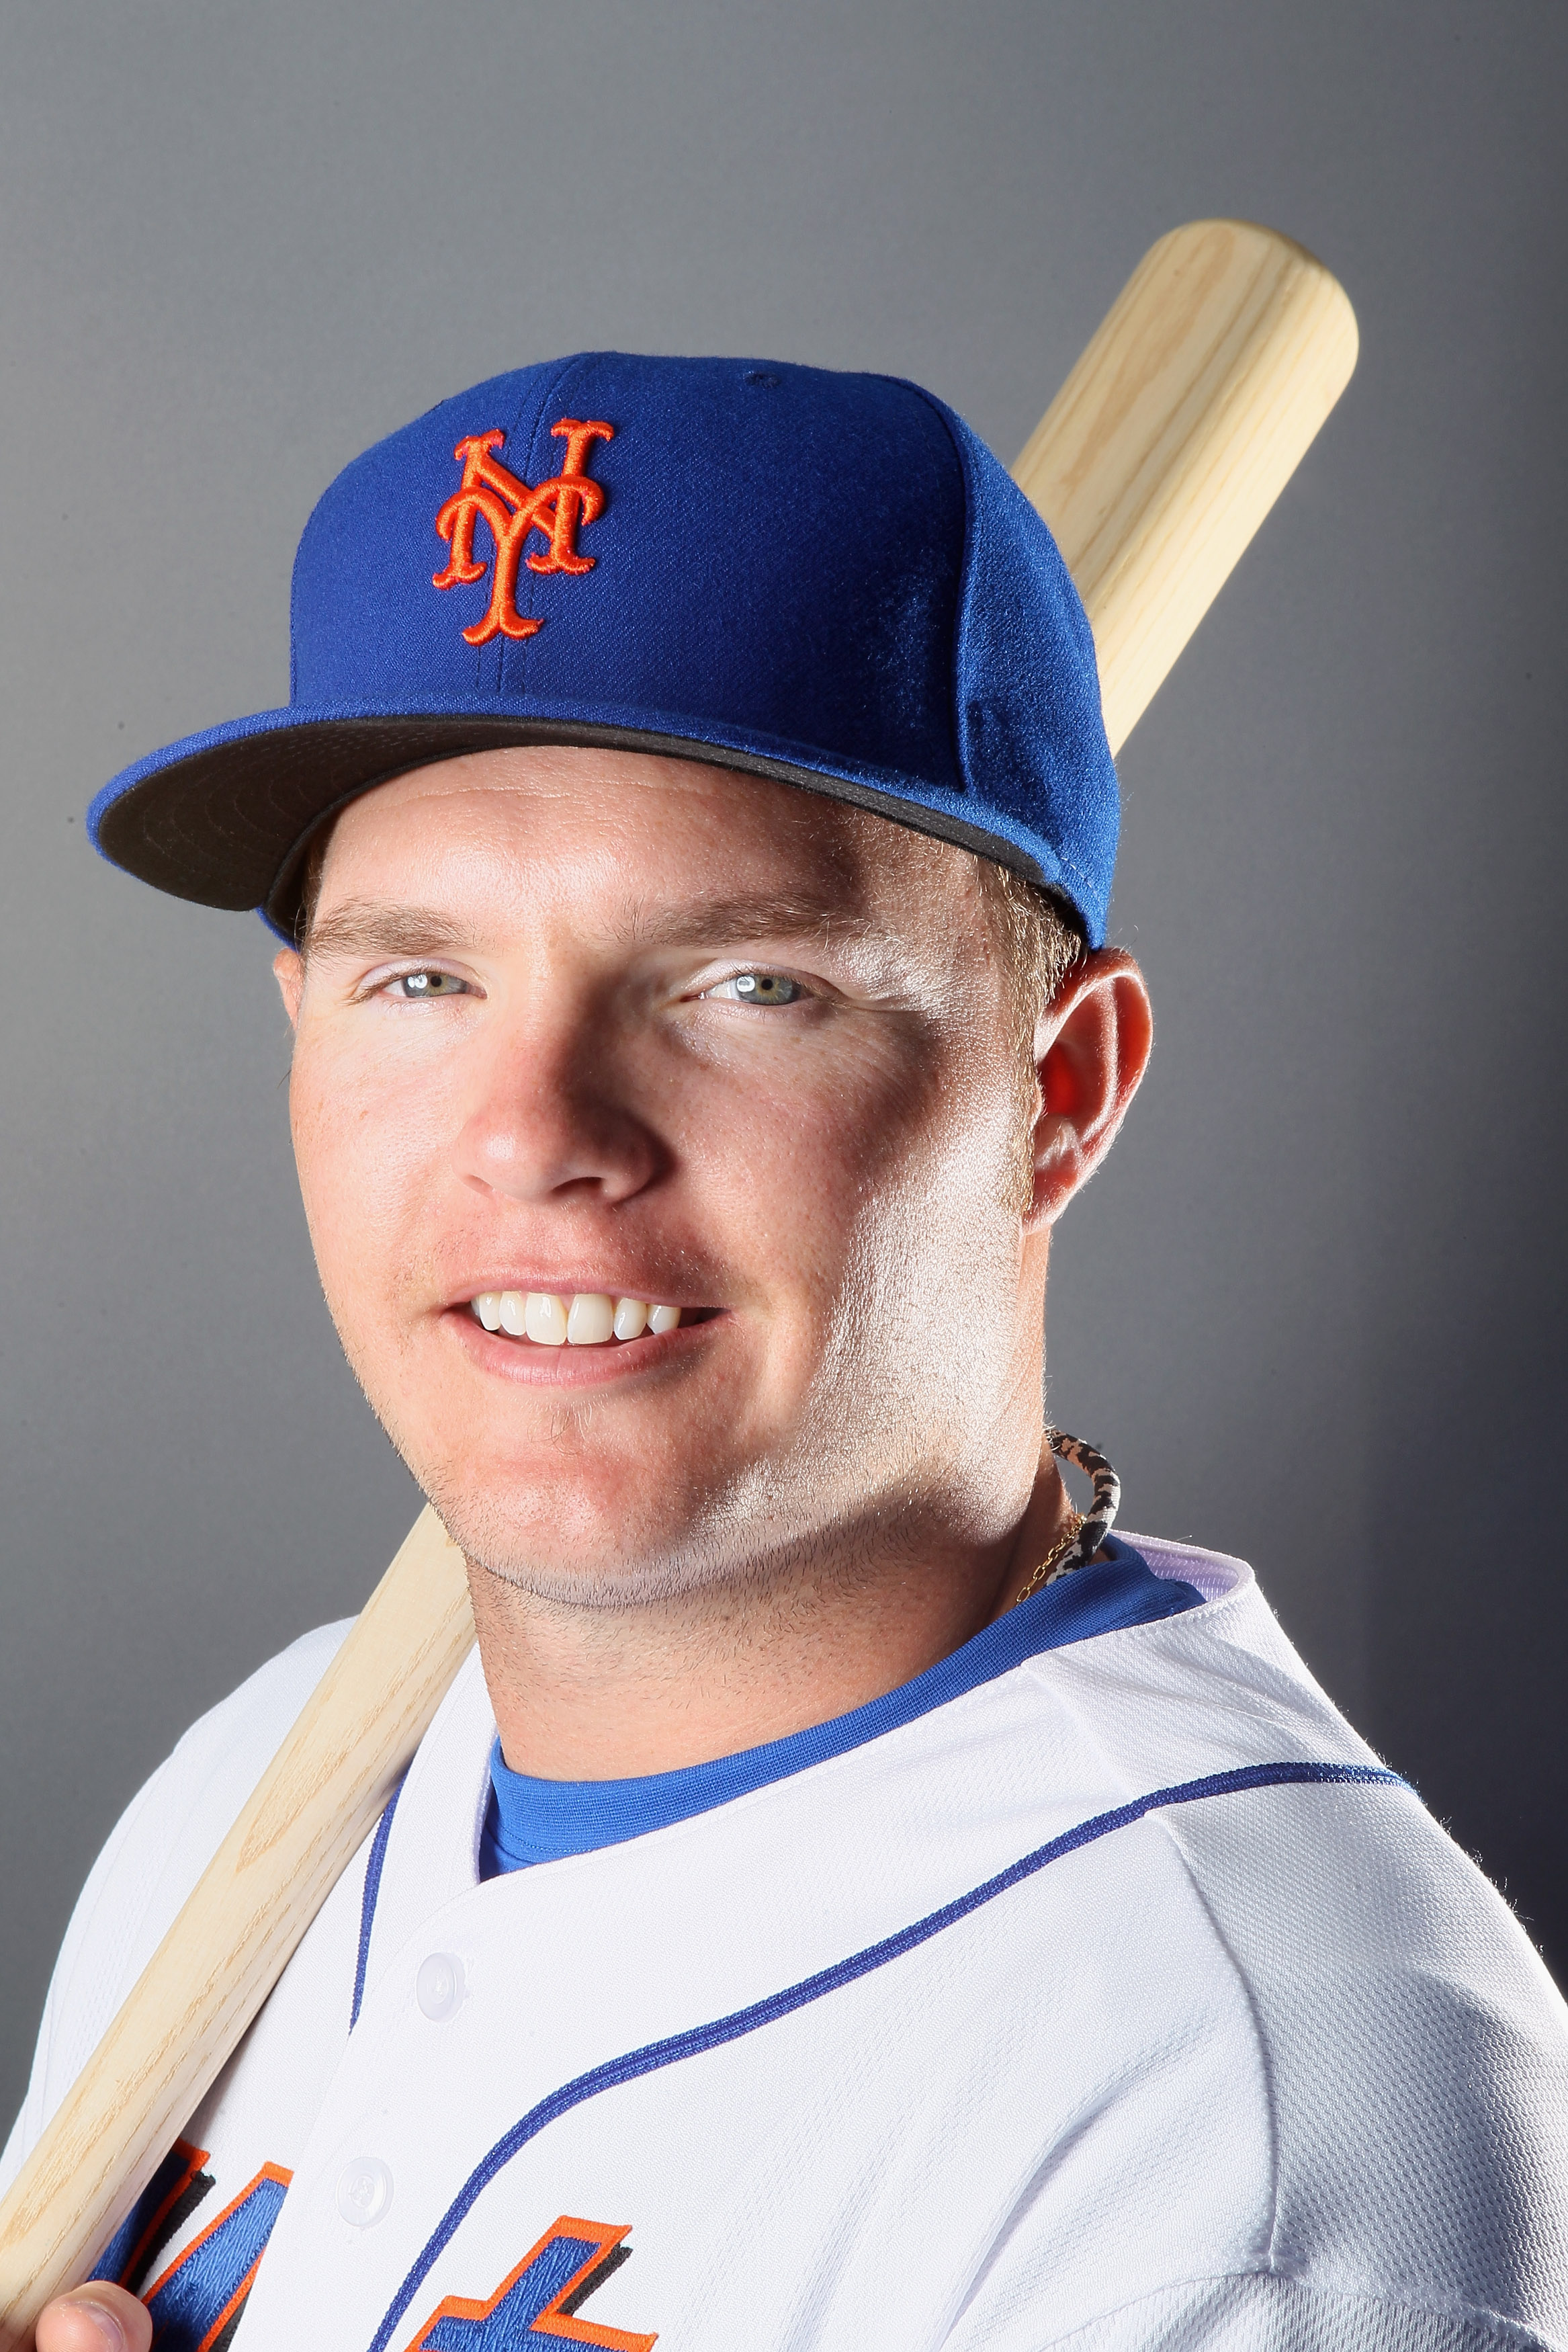 PORT ST. LUCIE, FL - FEBRUARY 24:  Brad Emaus #68 of the New York Mets poses for a portrait during the New York Mets Photo Day on February 24, 2011 at Digital Domain Park in Port St. Lucie, Florida.  (Photo by Elsa/Getty Images)